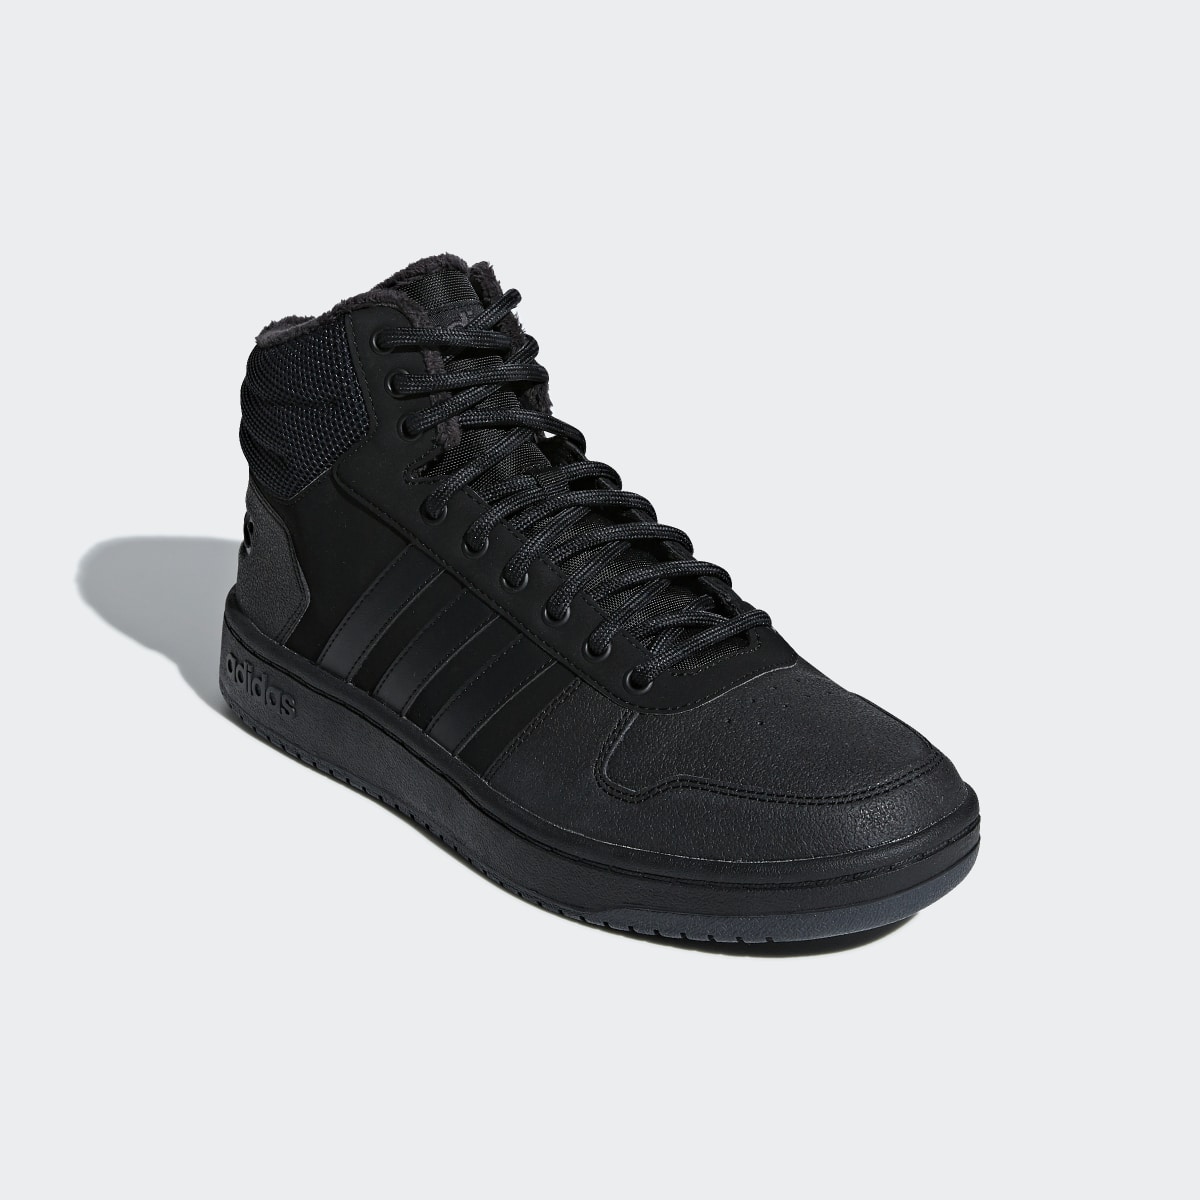 Adidas Chaussure Hoops 2.0 Mid. 6